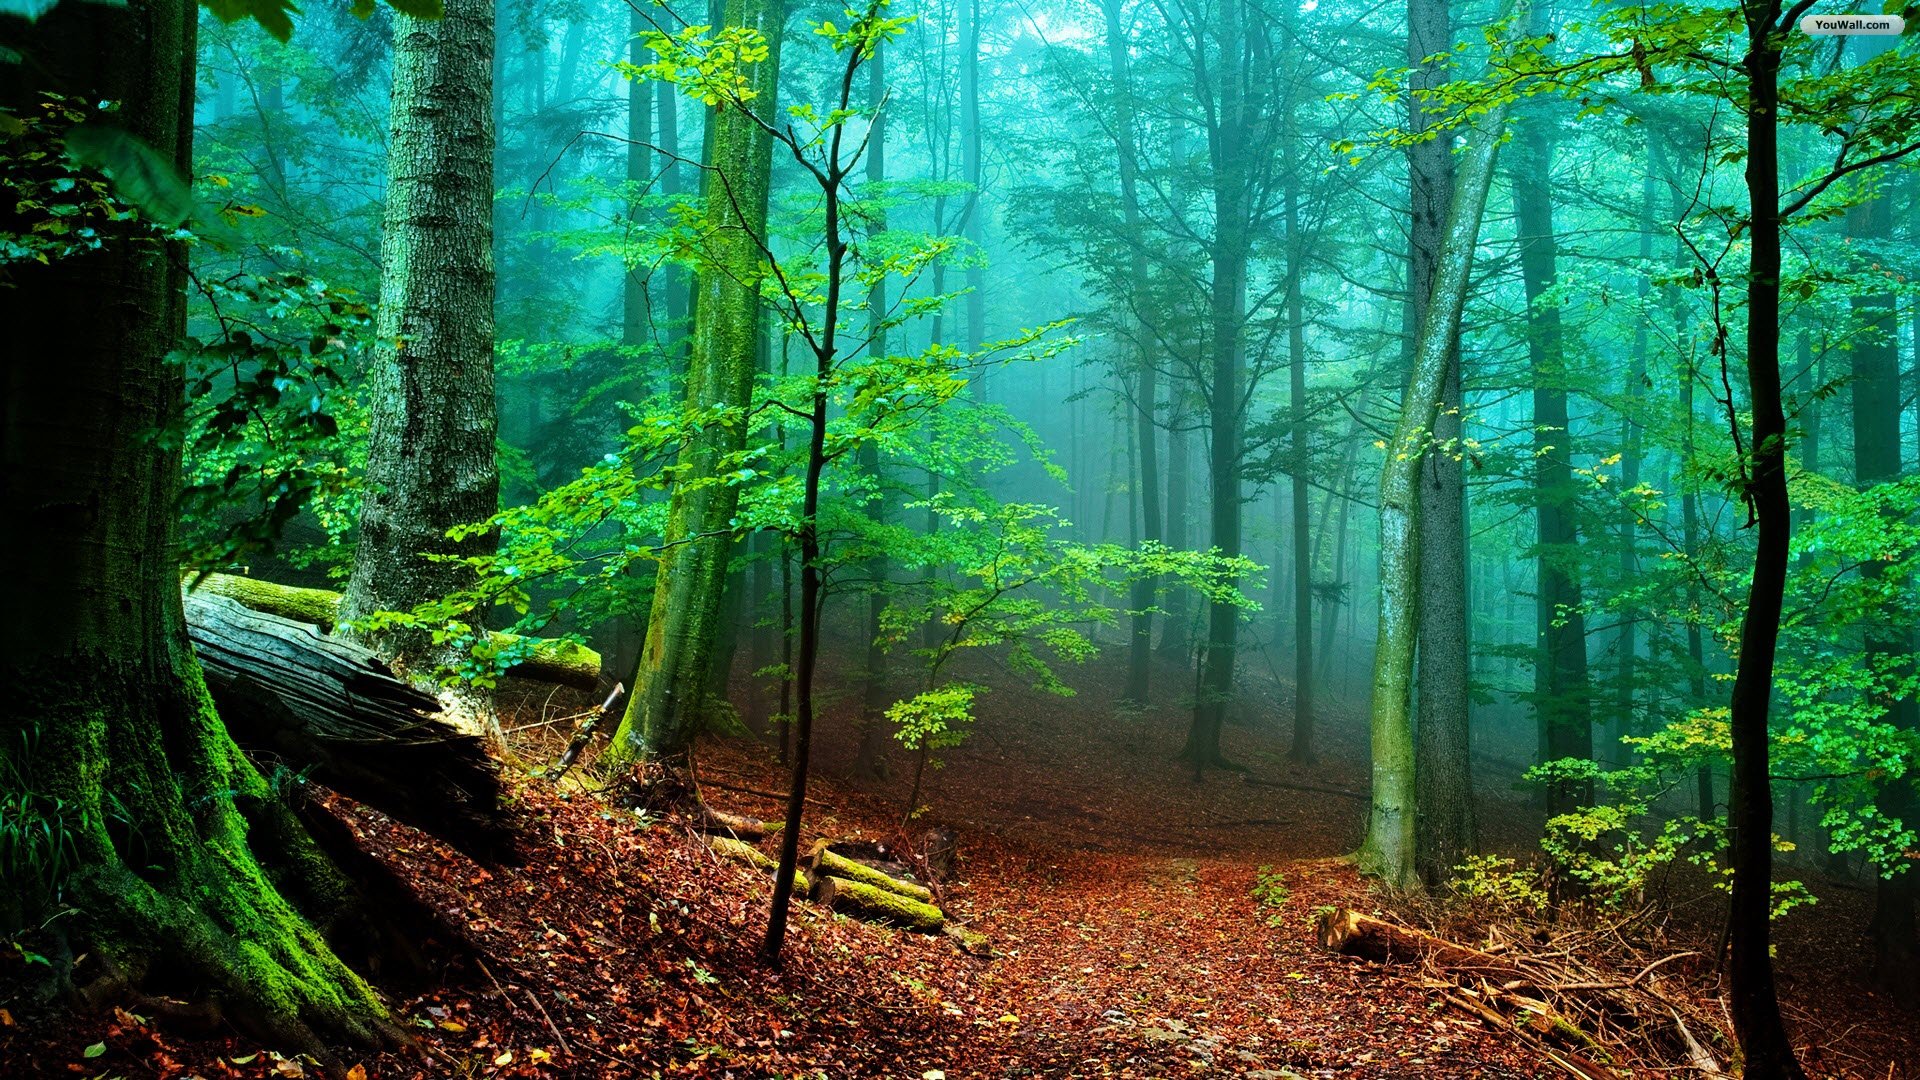 Image Wallpaper Image Forests